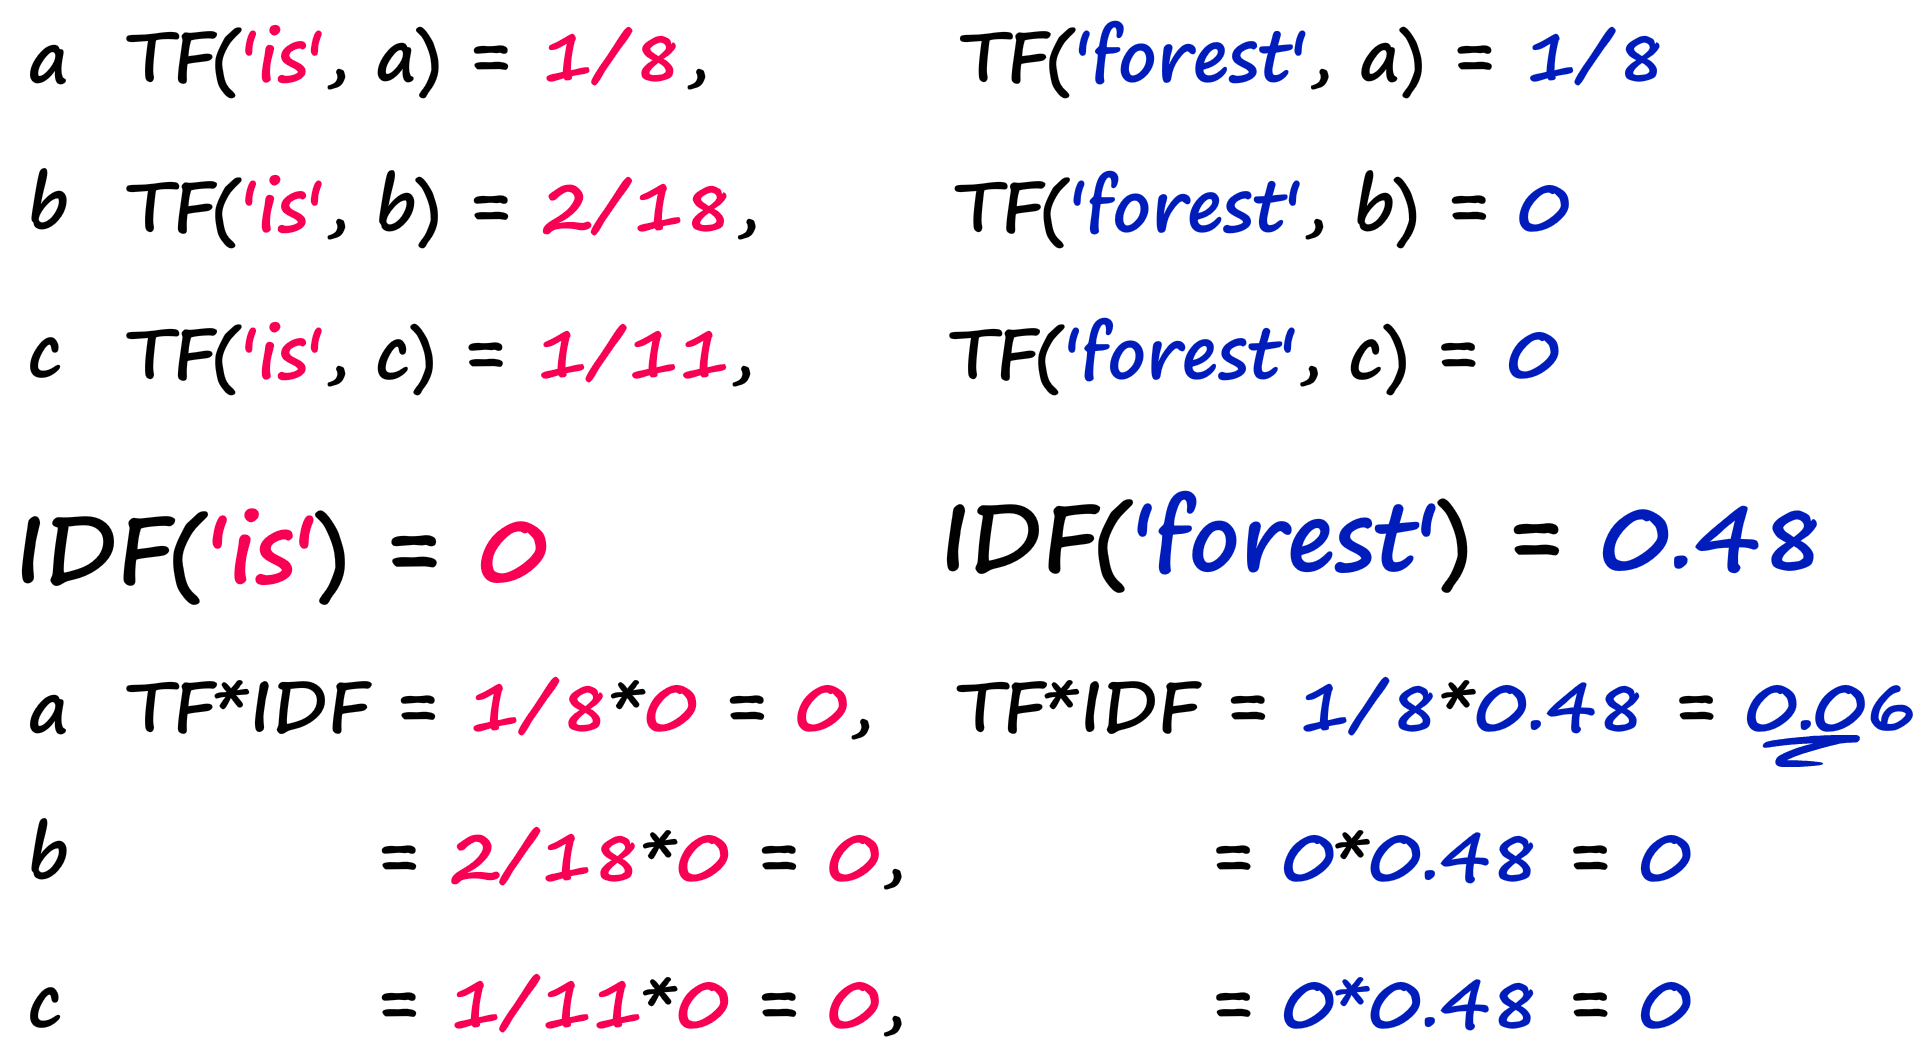 We calculate the TF(‘is’, D) and TF(‘forest’, D) scores for docs a, b, and c. The IDF value is across all docs — so we calculate just IDF(‘is’) and IDF(‘forest’) once. Then, we get TF-IDF values for both words in each doc by multiplying the TF and IDF components. Sentence a scores highest for ‘forest’, and ‘is’ always scores 0 as the IDF(‘is’) score is 0.